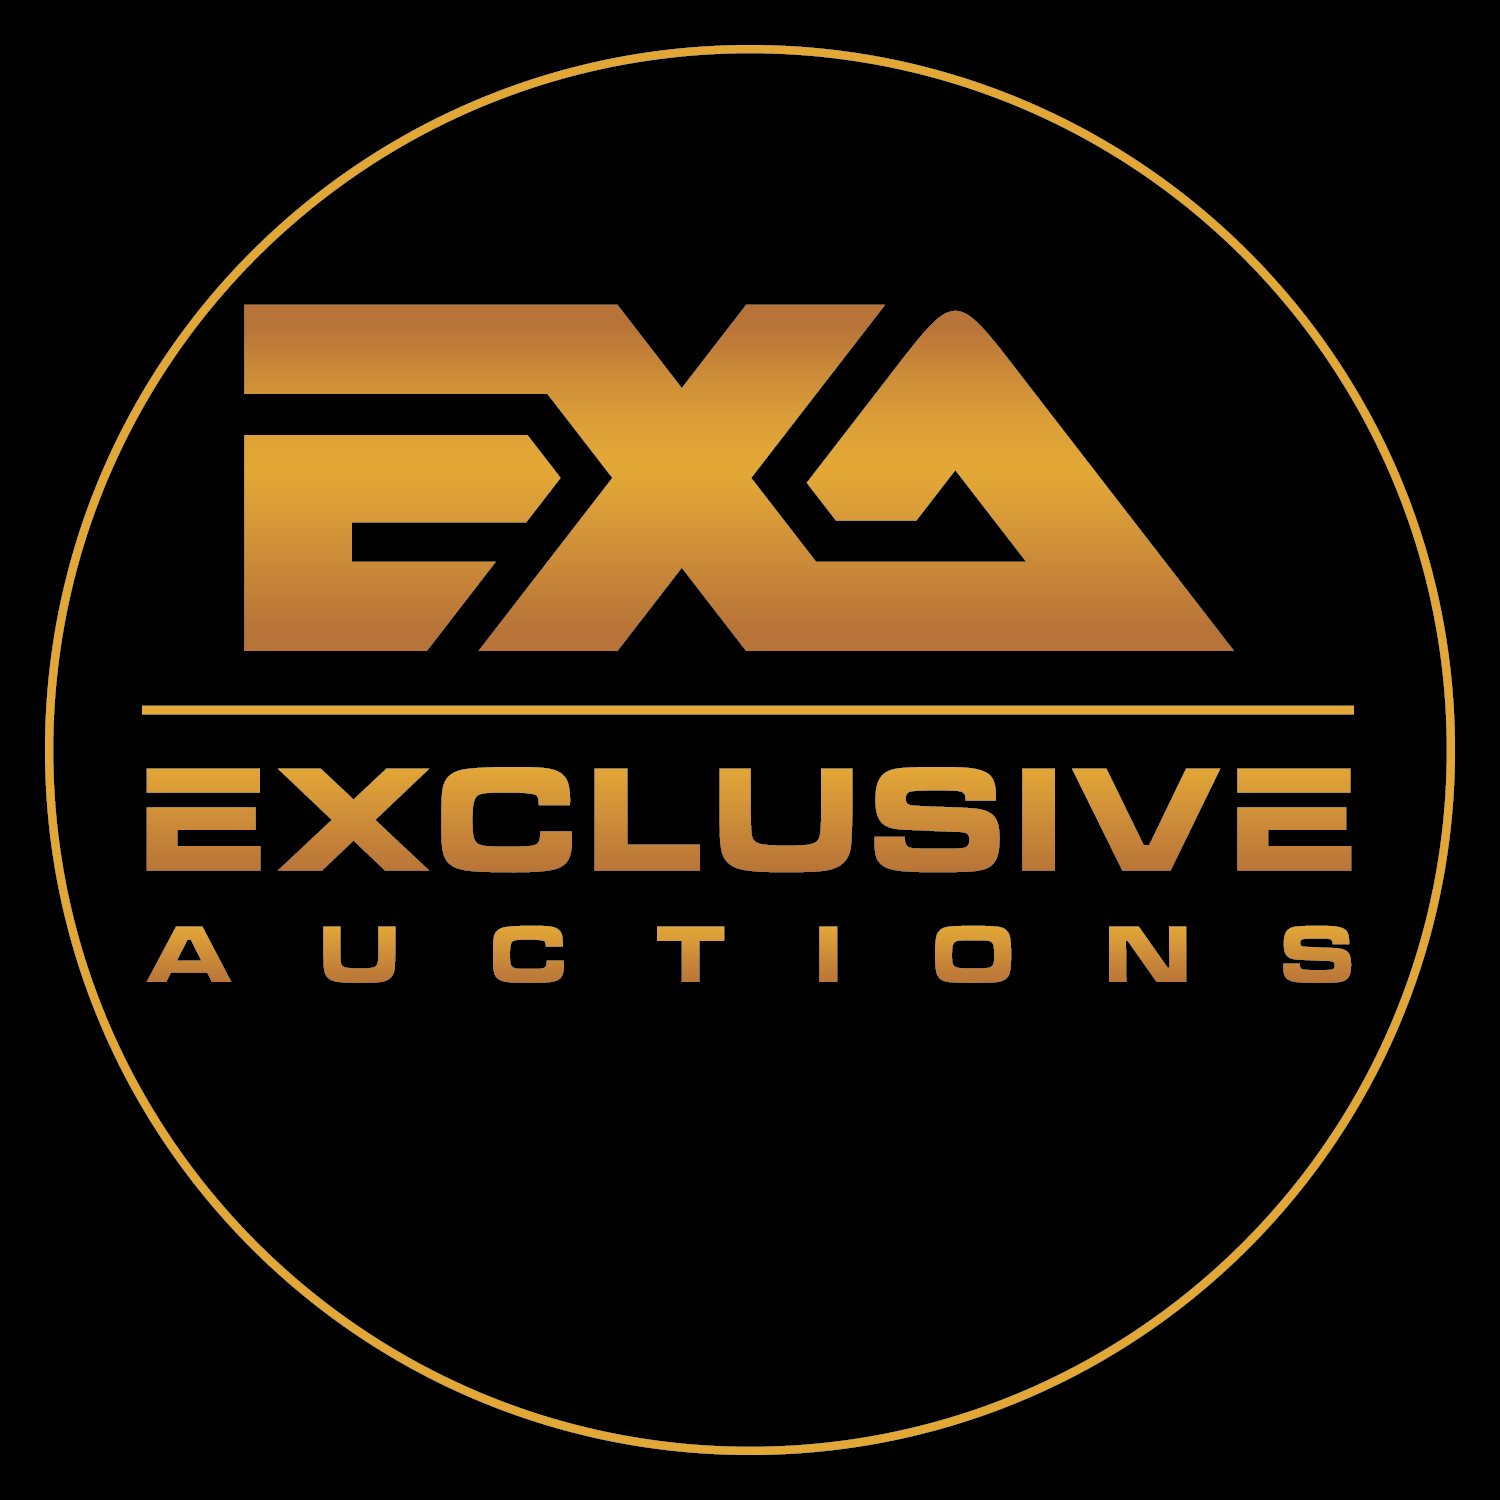 EXCLUSIVE AUCTIONS